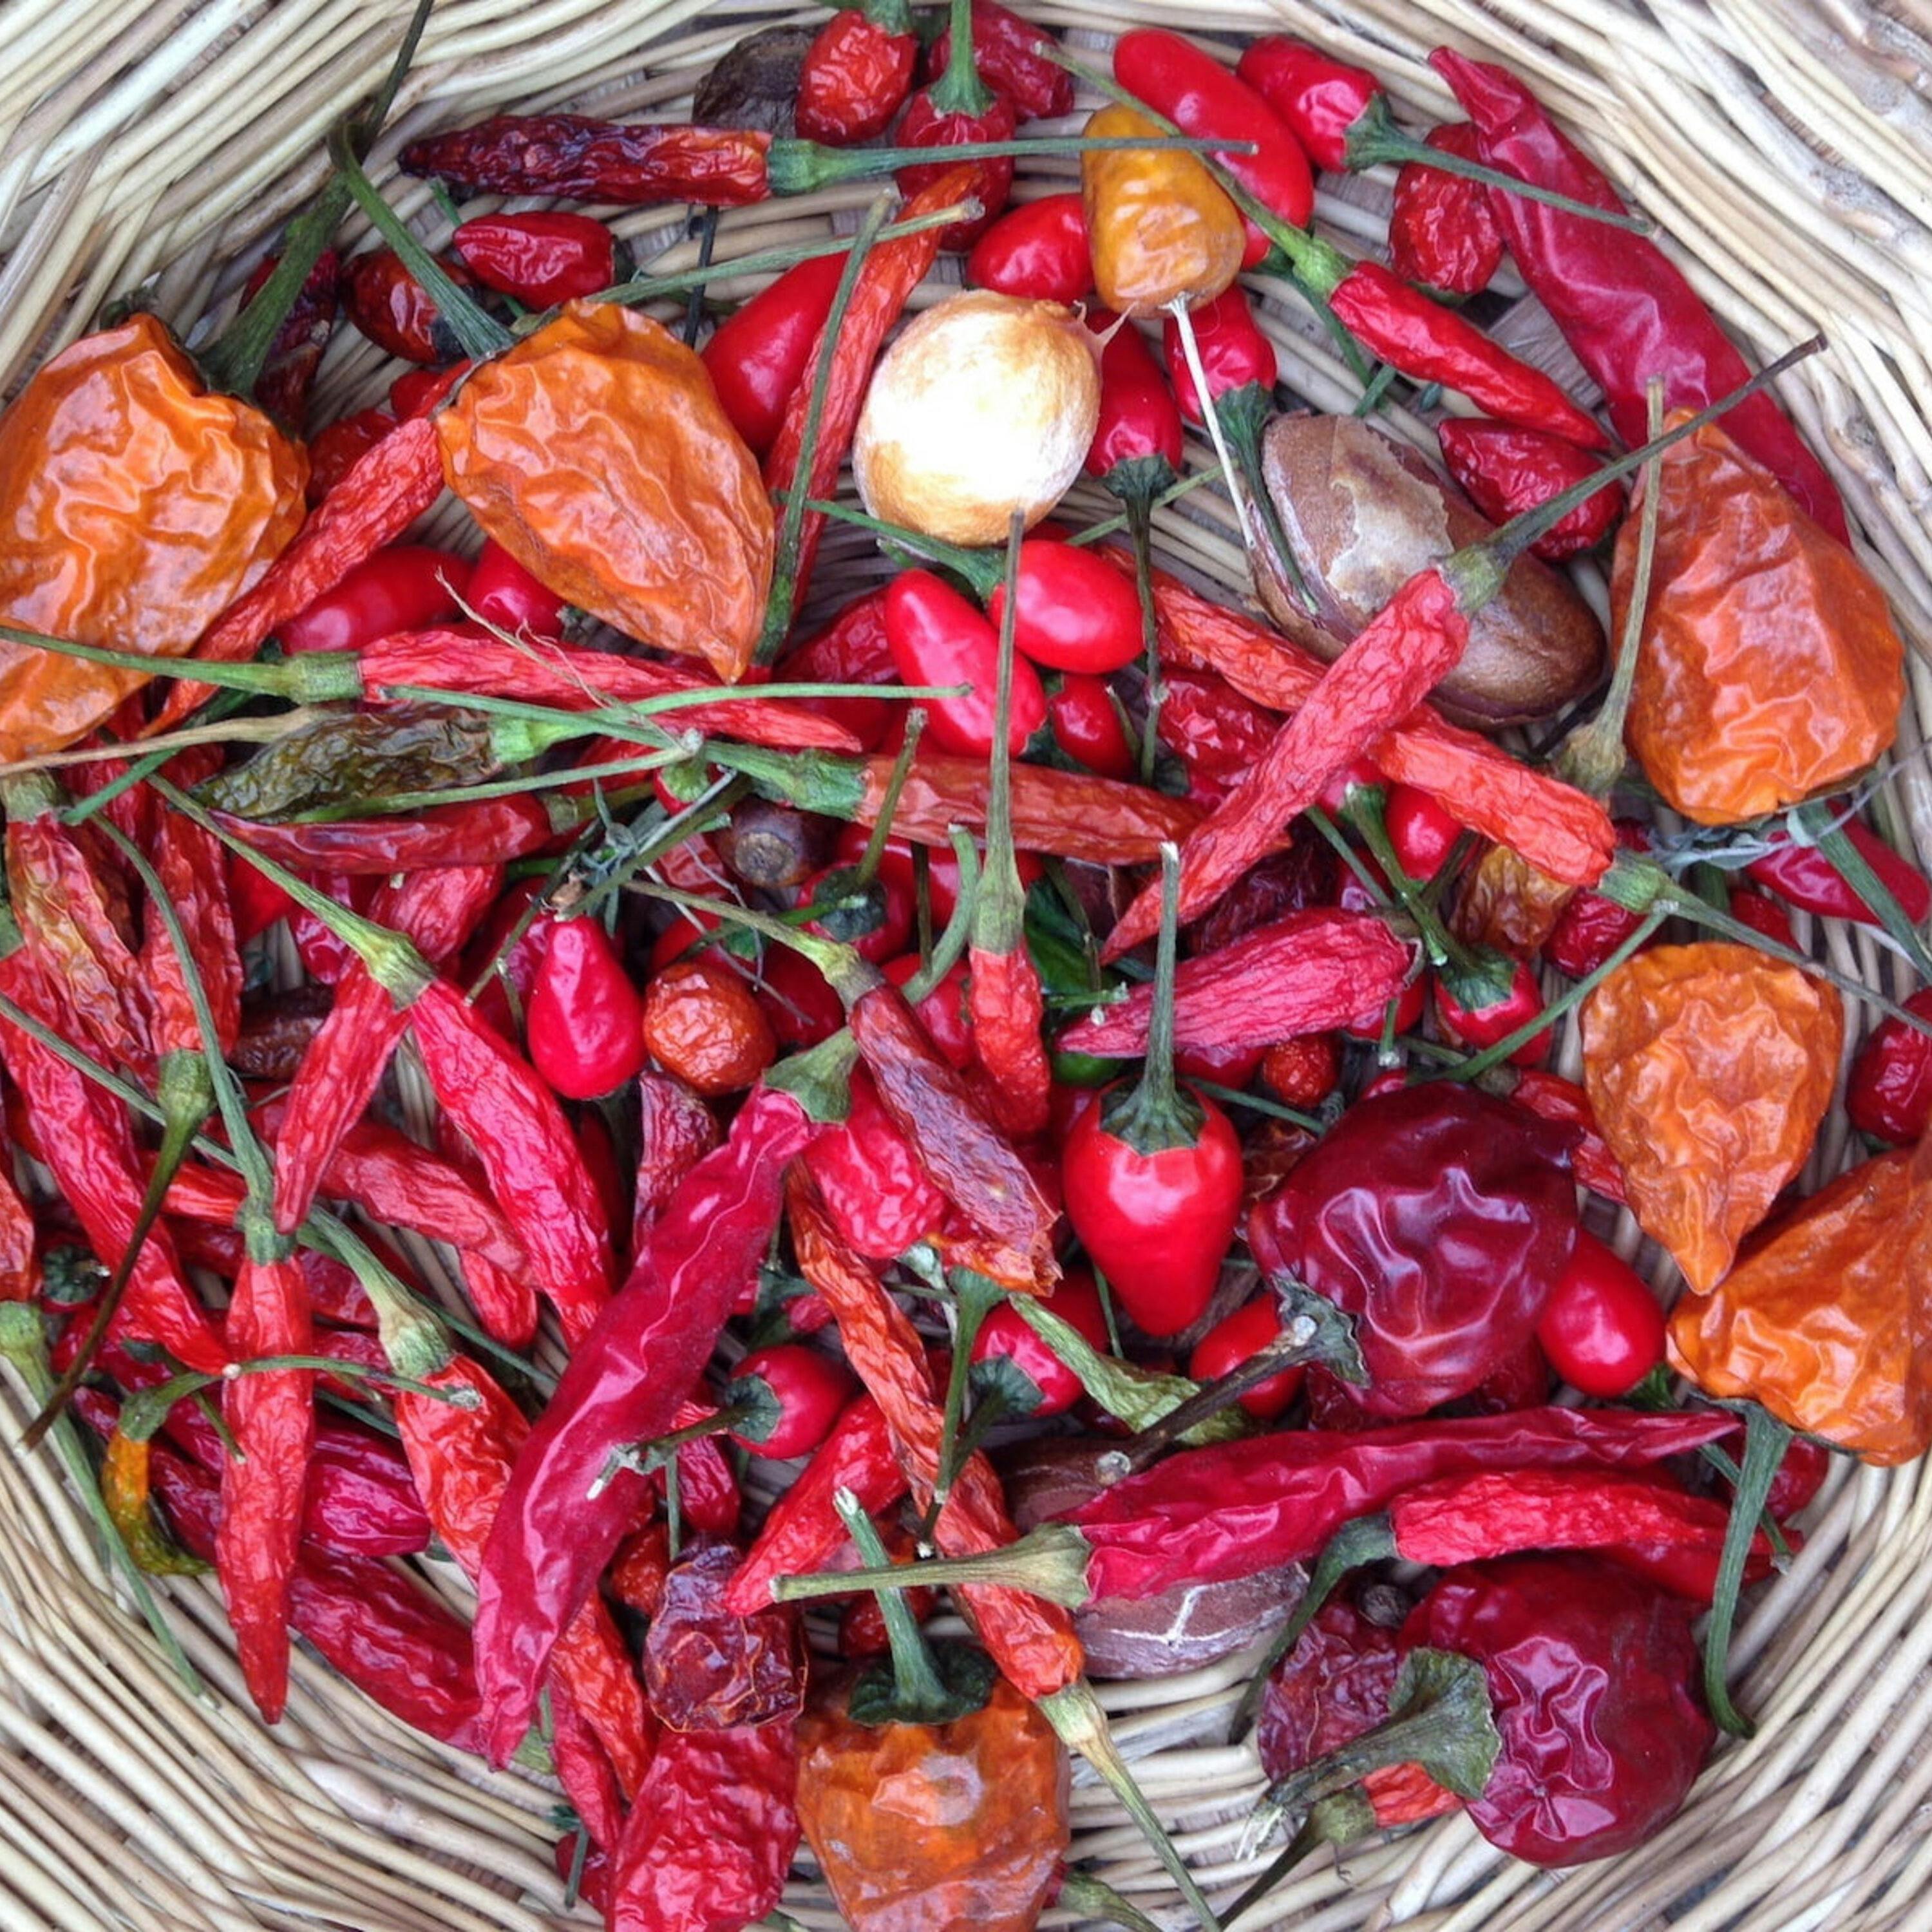 So Hot Right Now: Why We Love the Chile Pepper